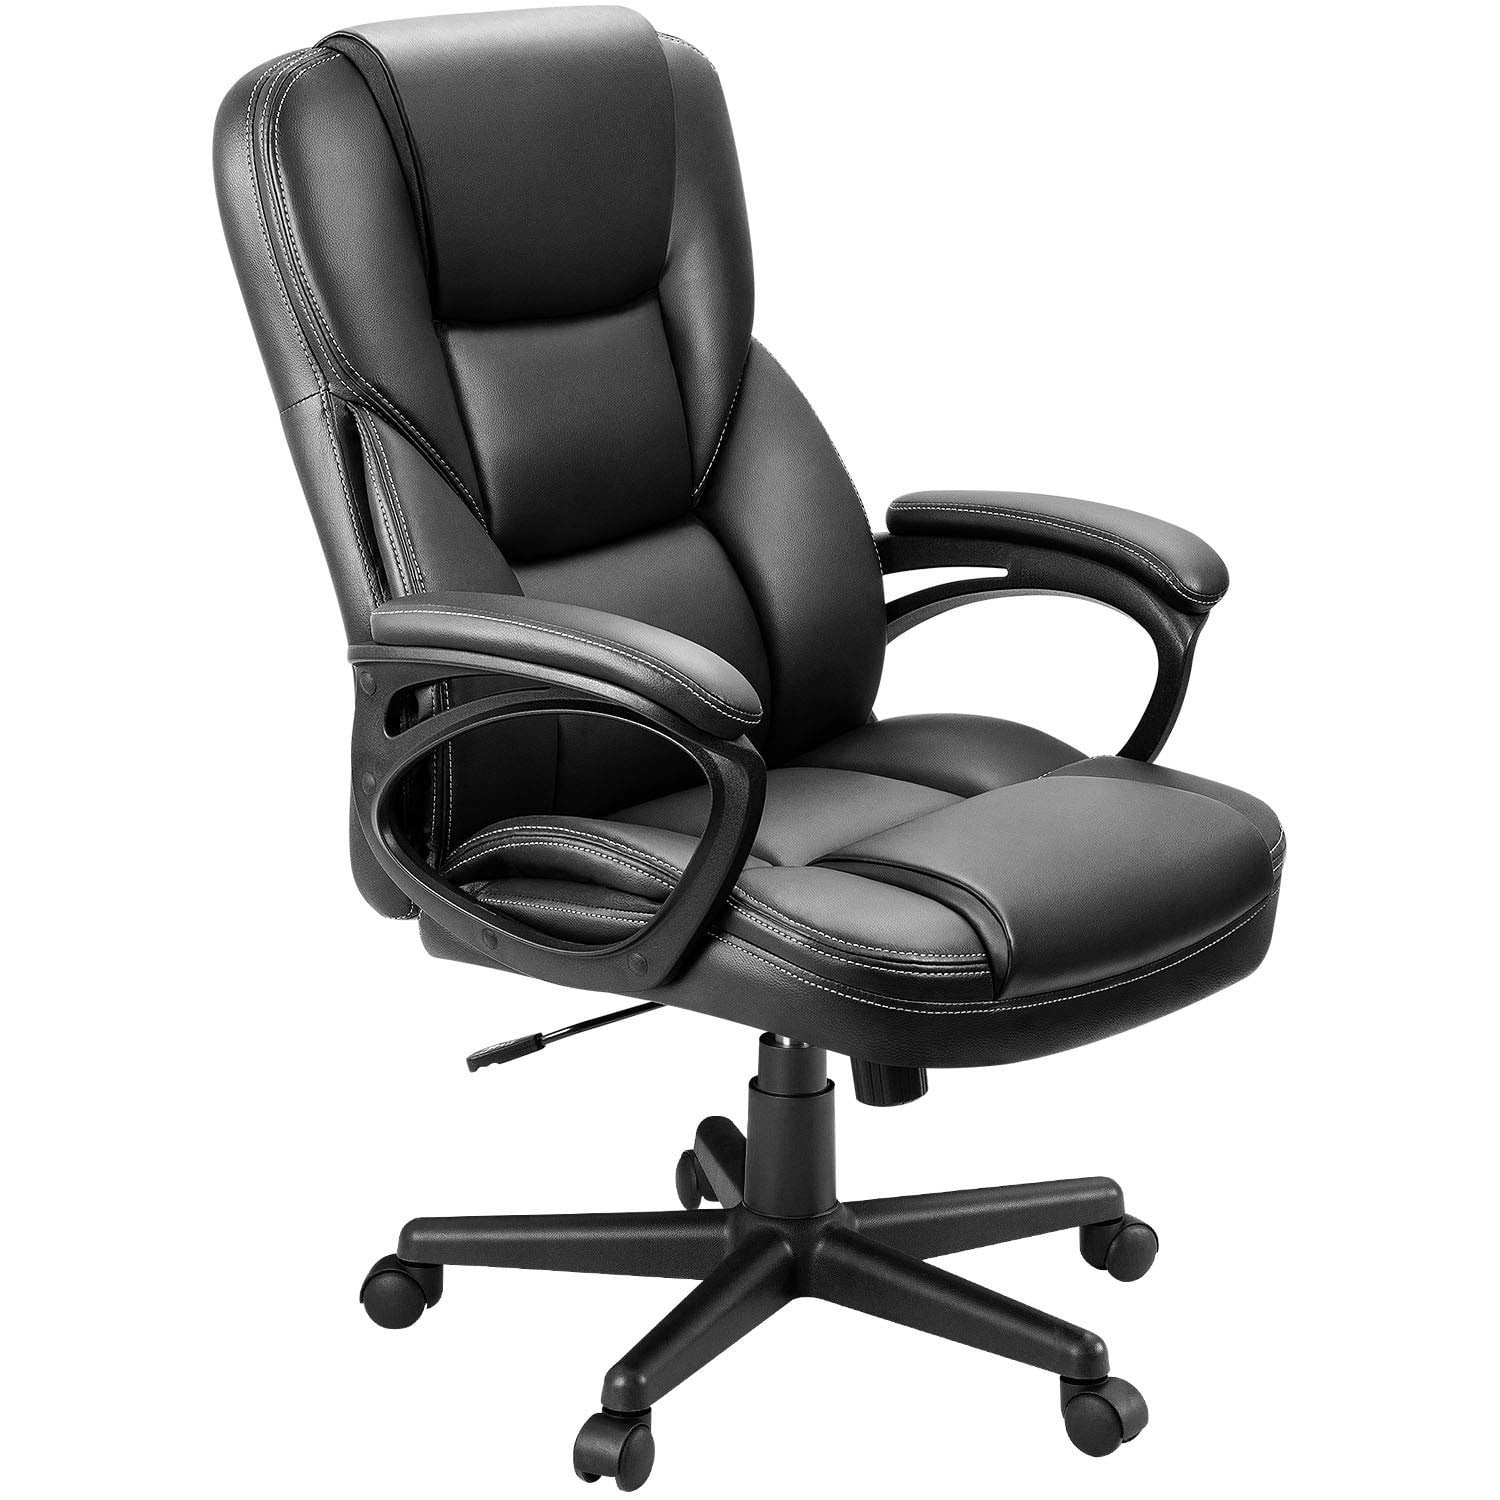 Total 79+ imagen black leather chair office